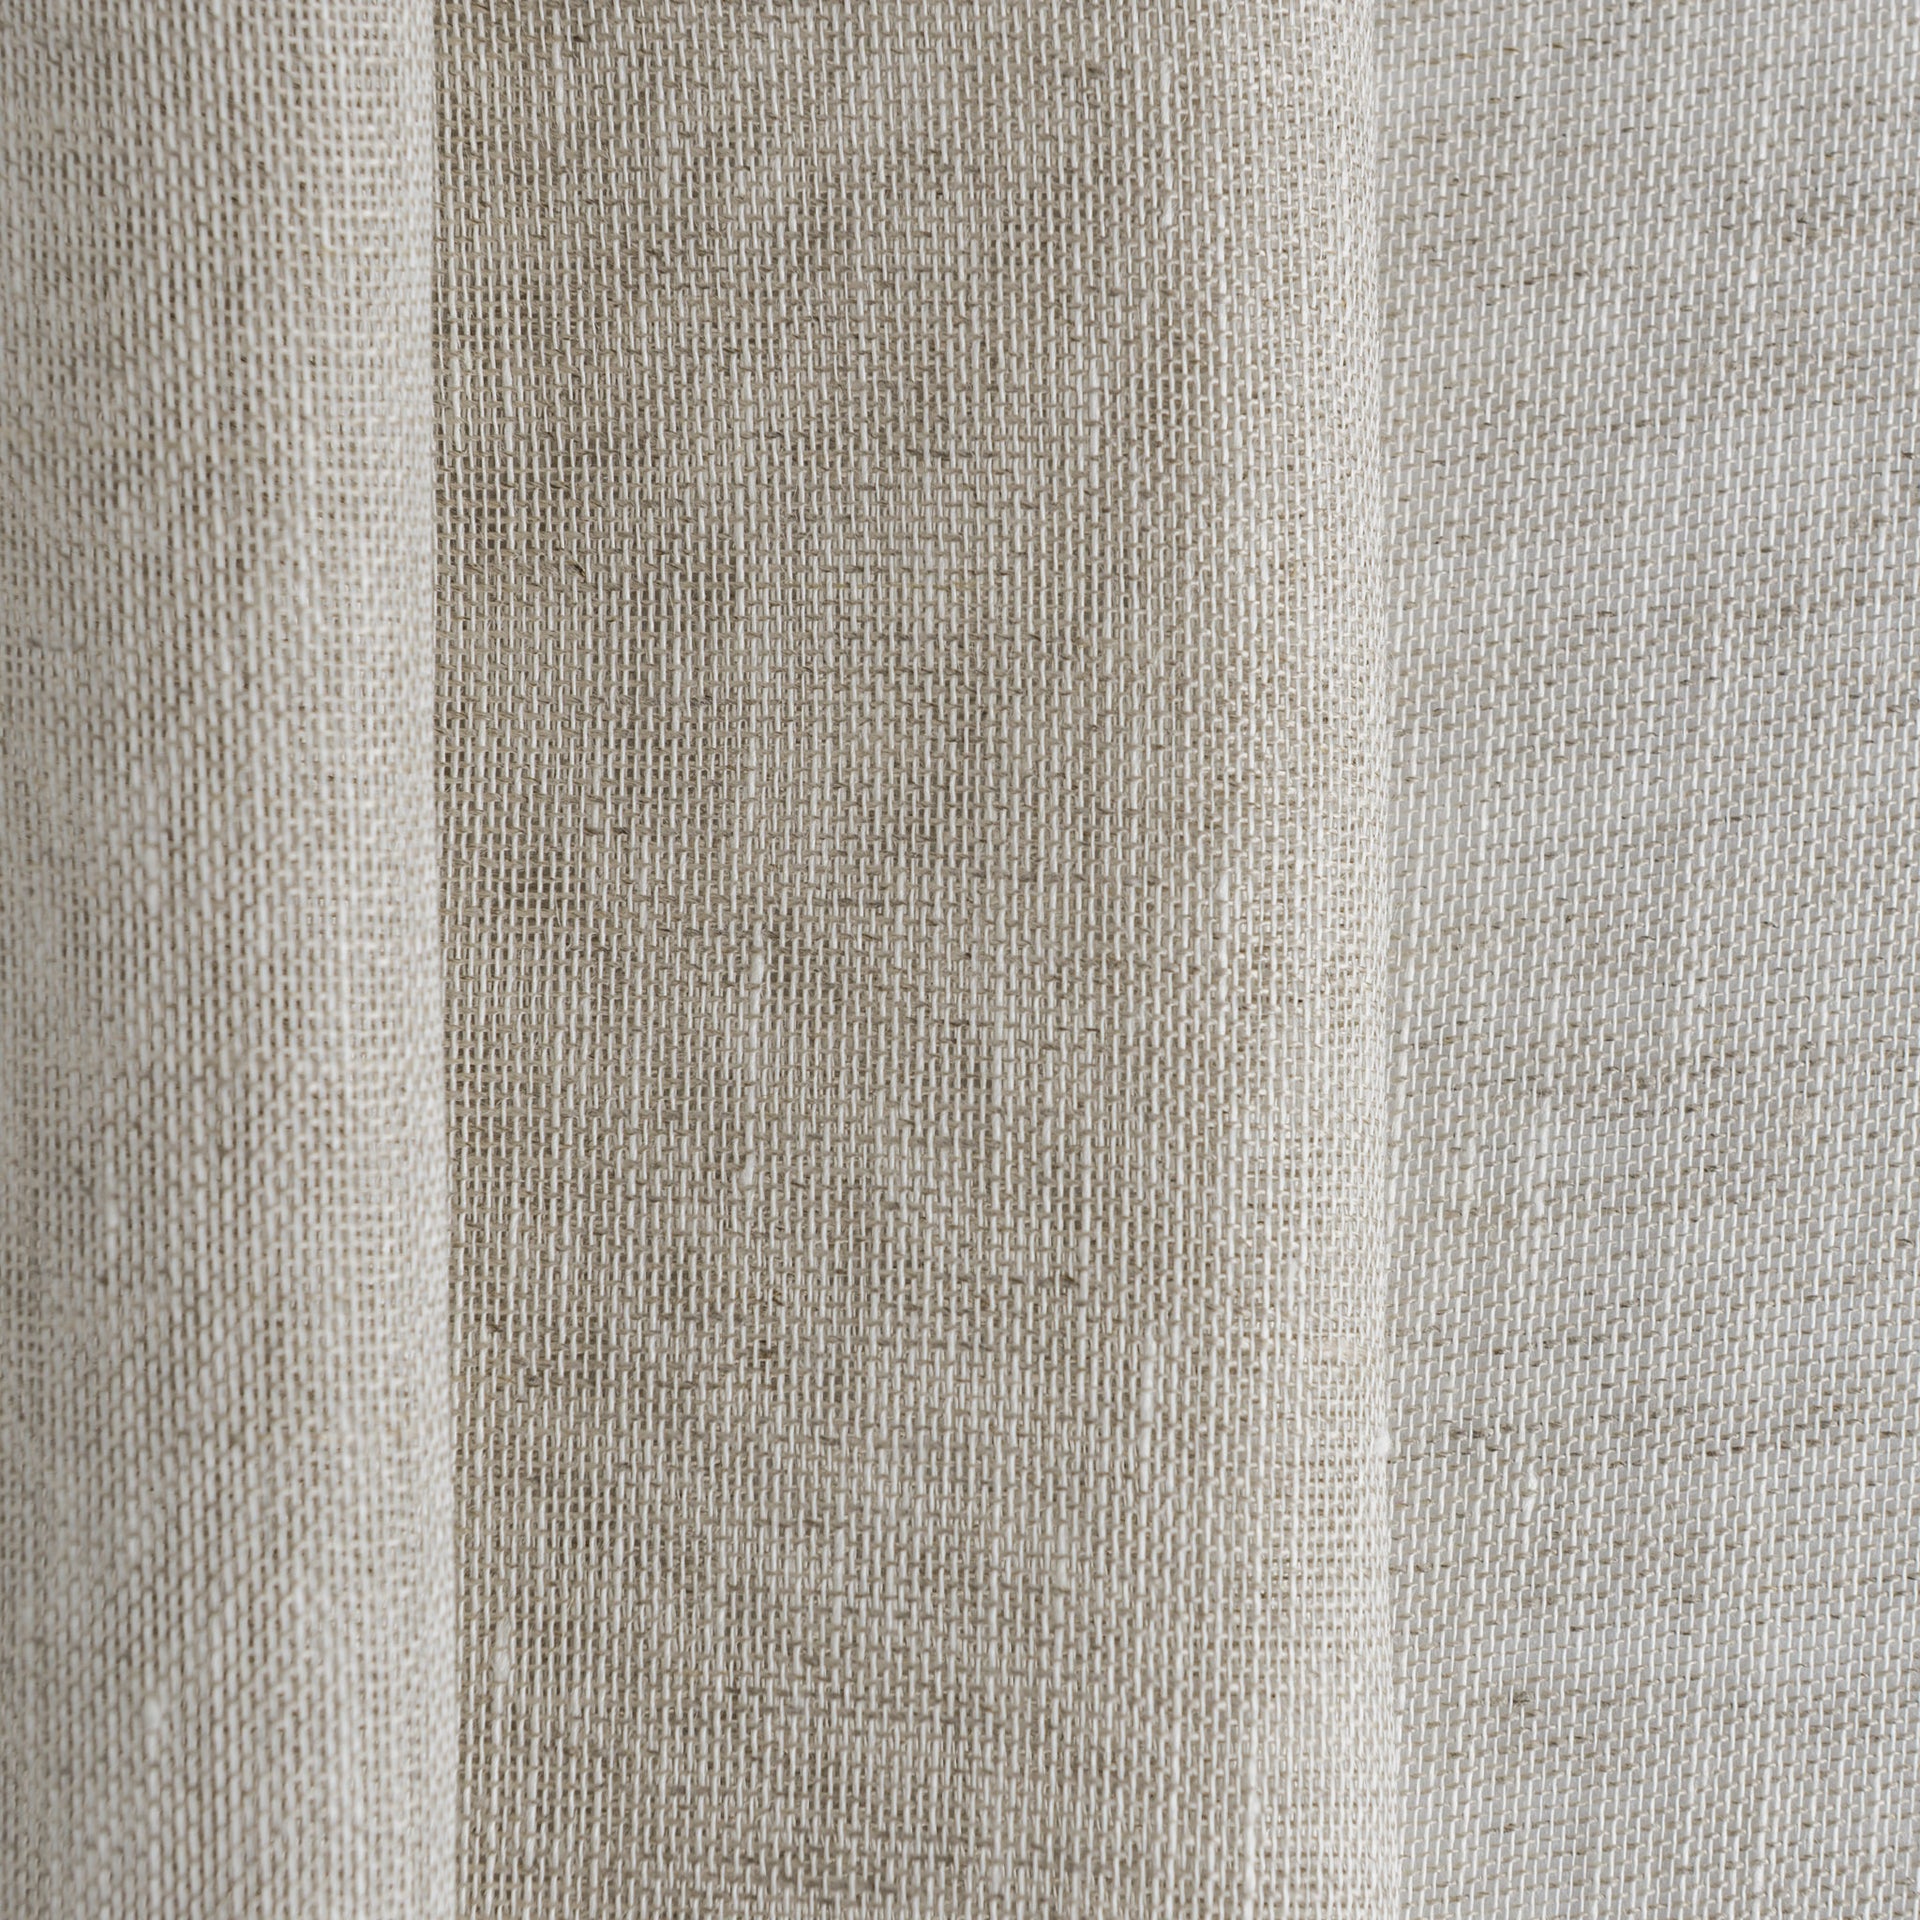 Natural Linen Sheer Fabric by the Yard - 100% French Natural - Width 52”- 106”